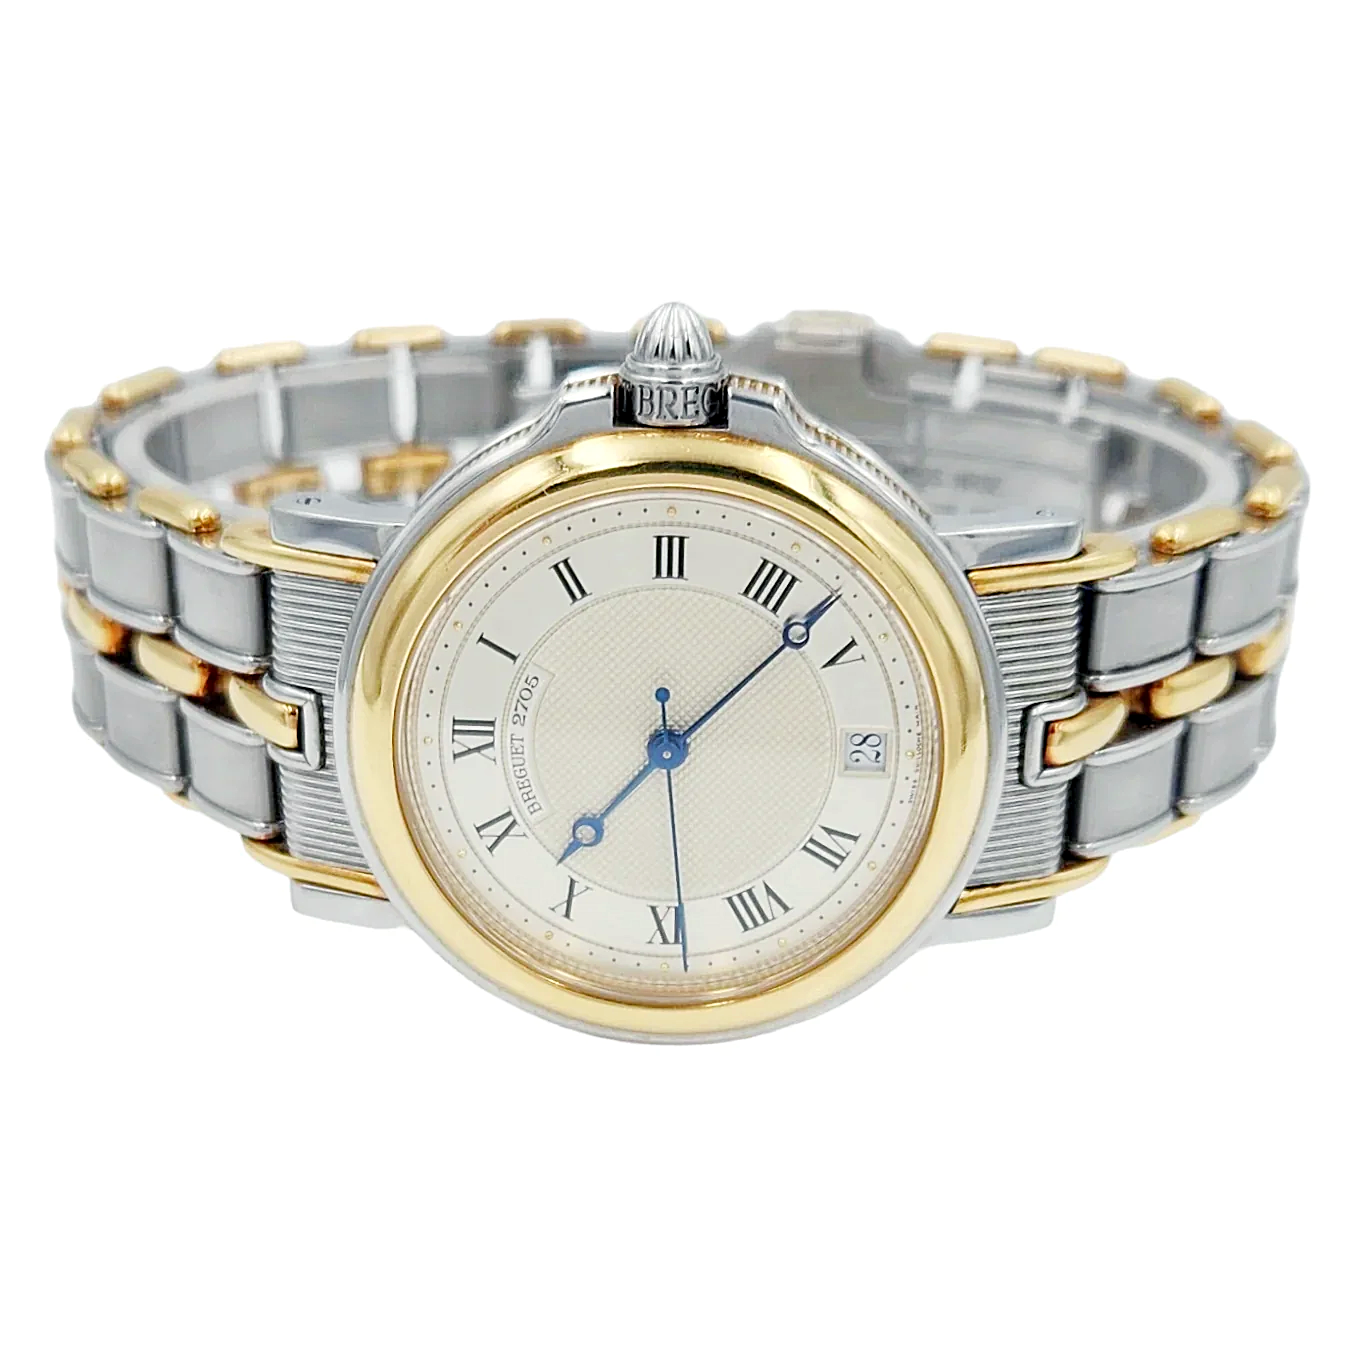 Men's Breguet 35mm Marine Automatic Two Tone 18K Yellow Gold / Stainless Steel Watch with Gold / Silver Dial and Gold Bezel. (Pre-Owned 2705)